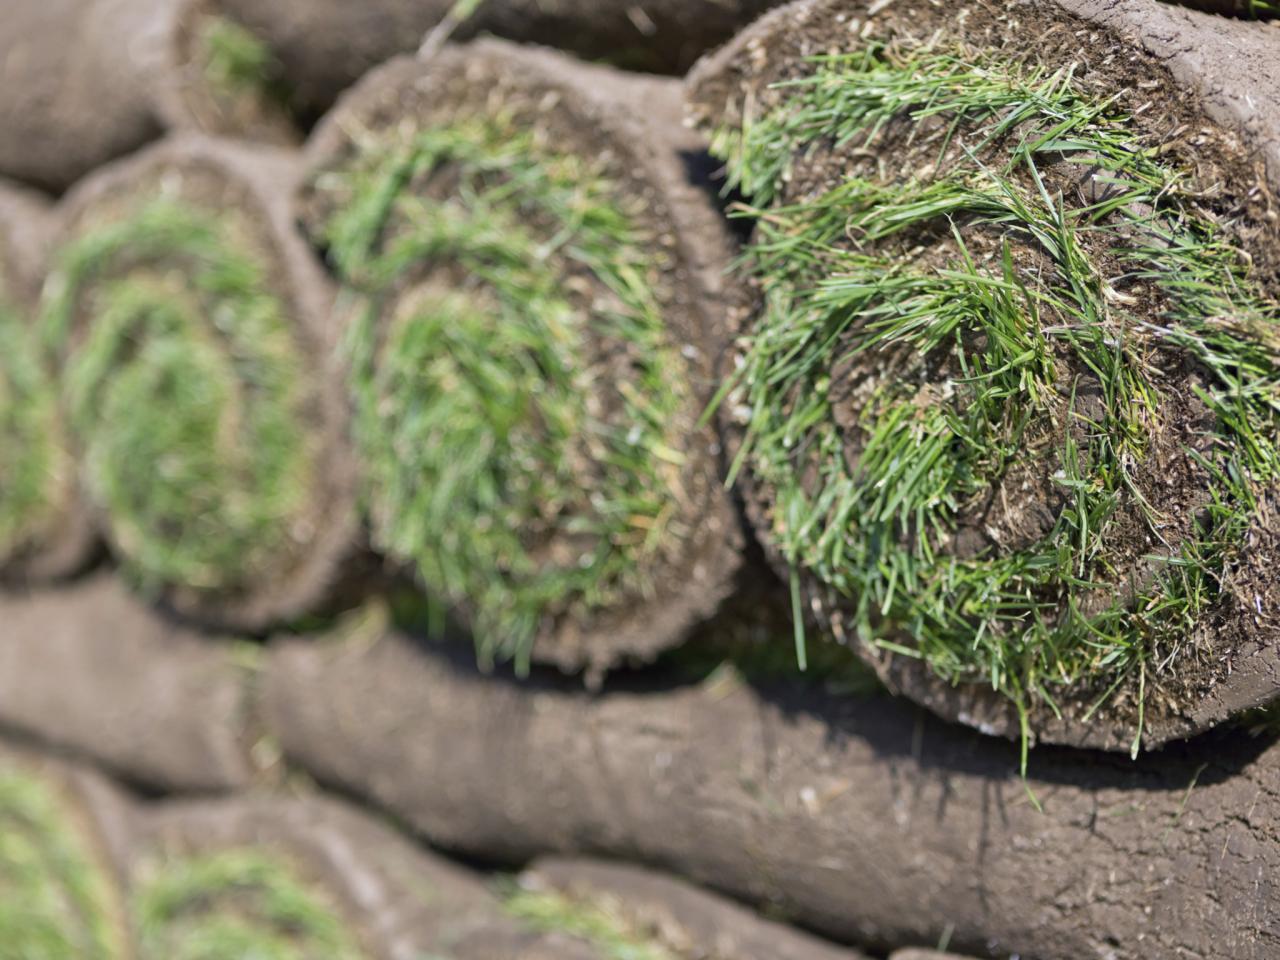 How to Install Sod | how-tos | DIY